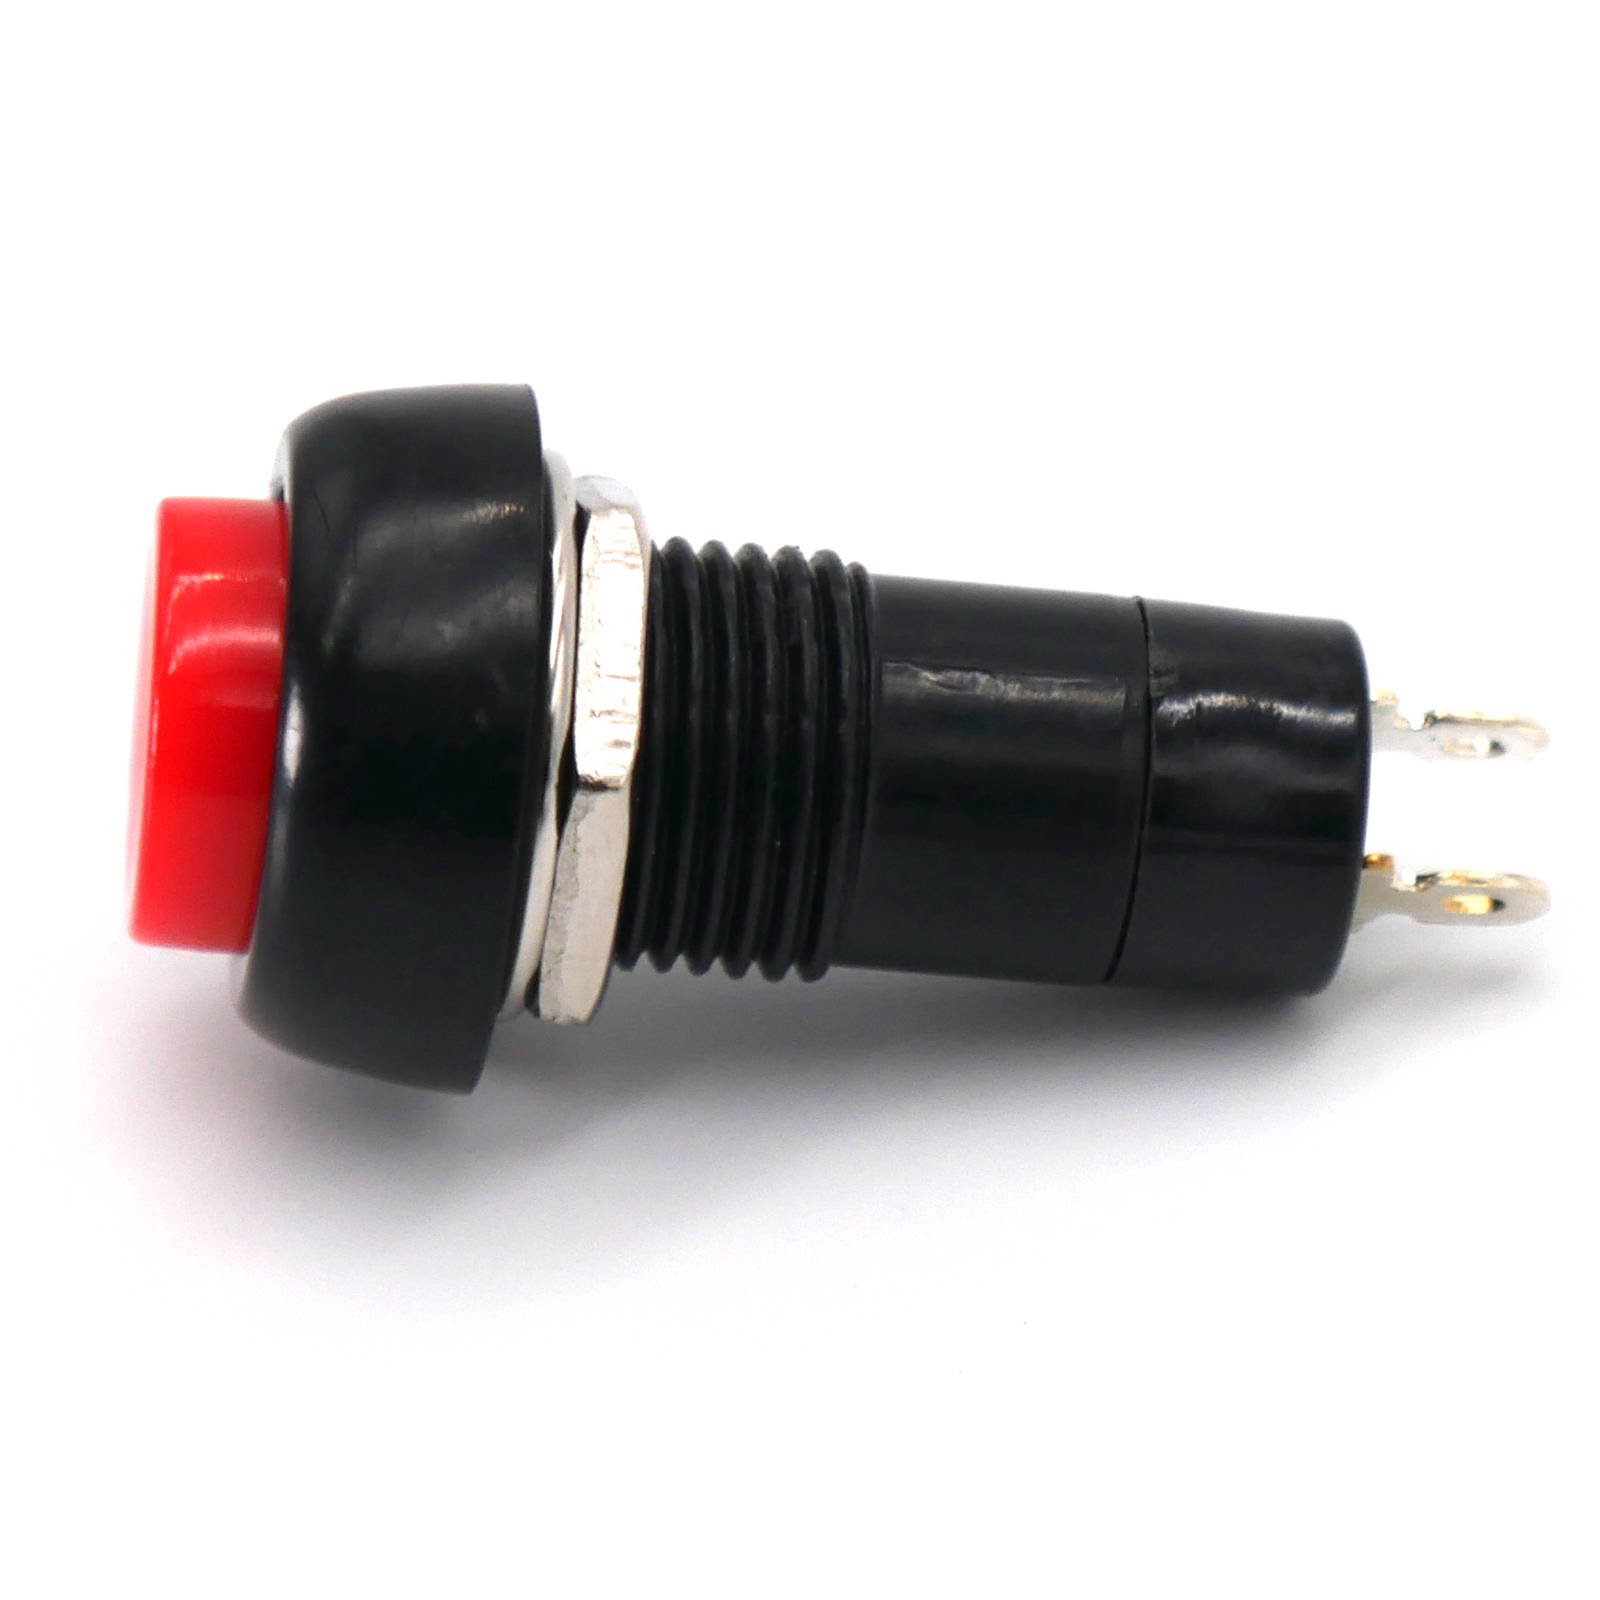 Induction start switch replacement part for induction liner machines